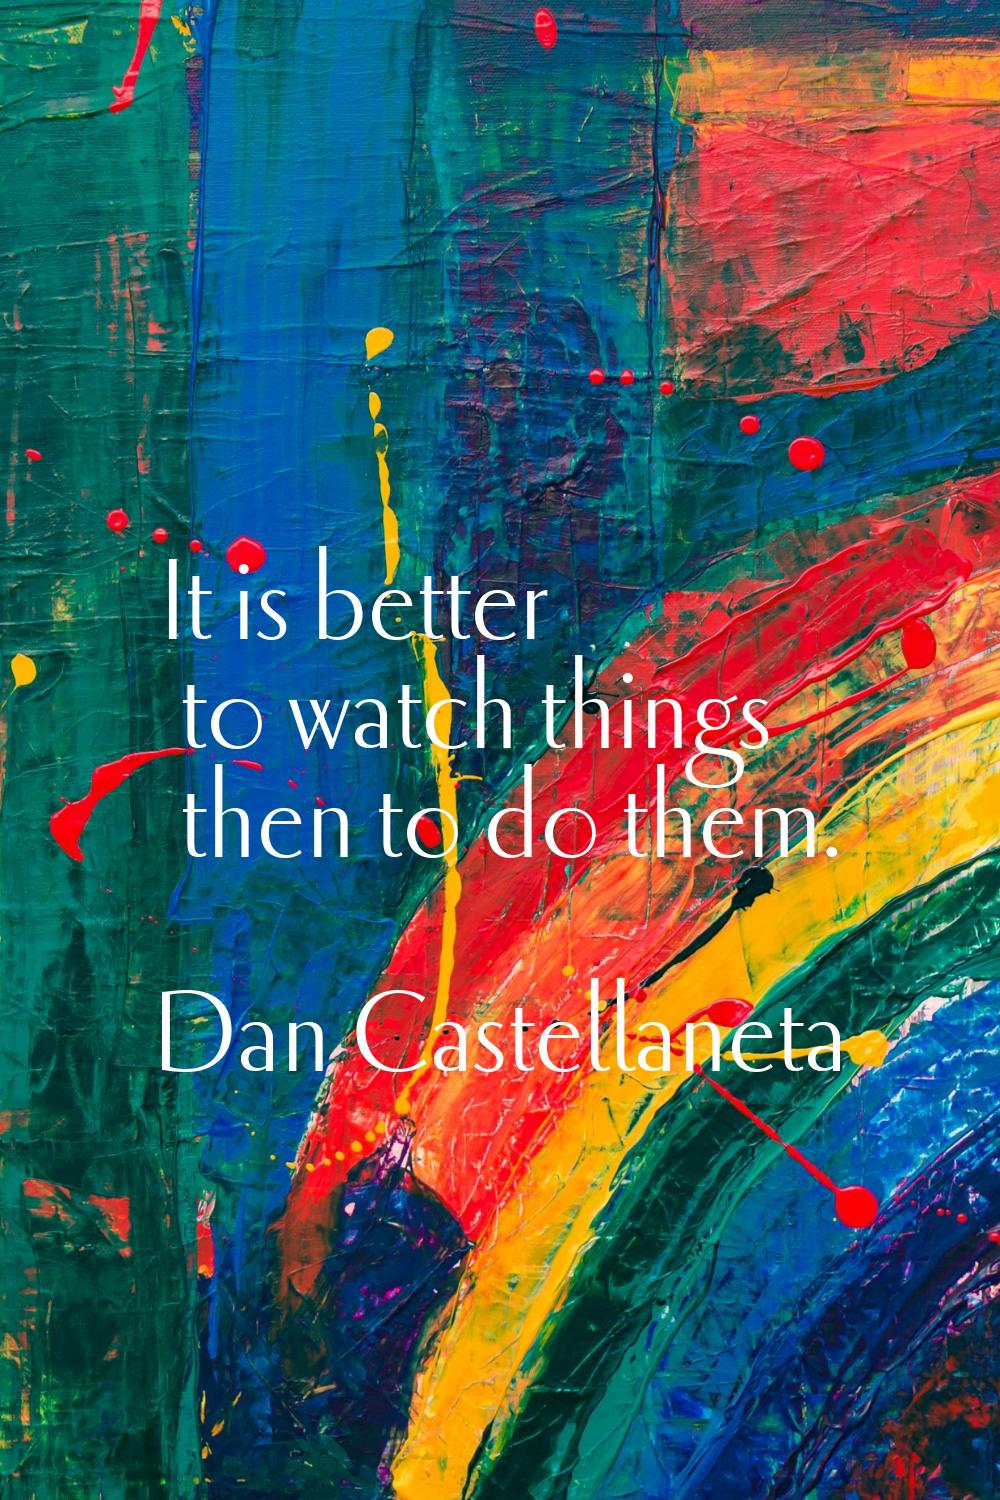 It is better to watch things then to do them.